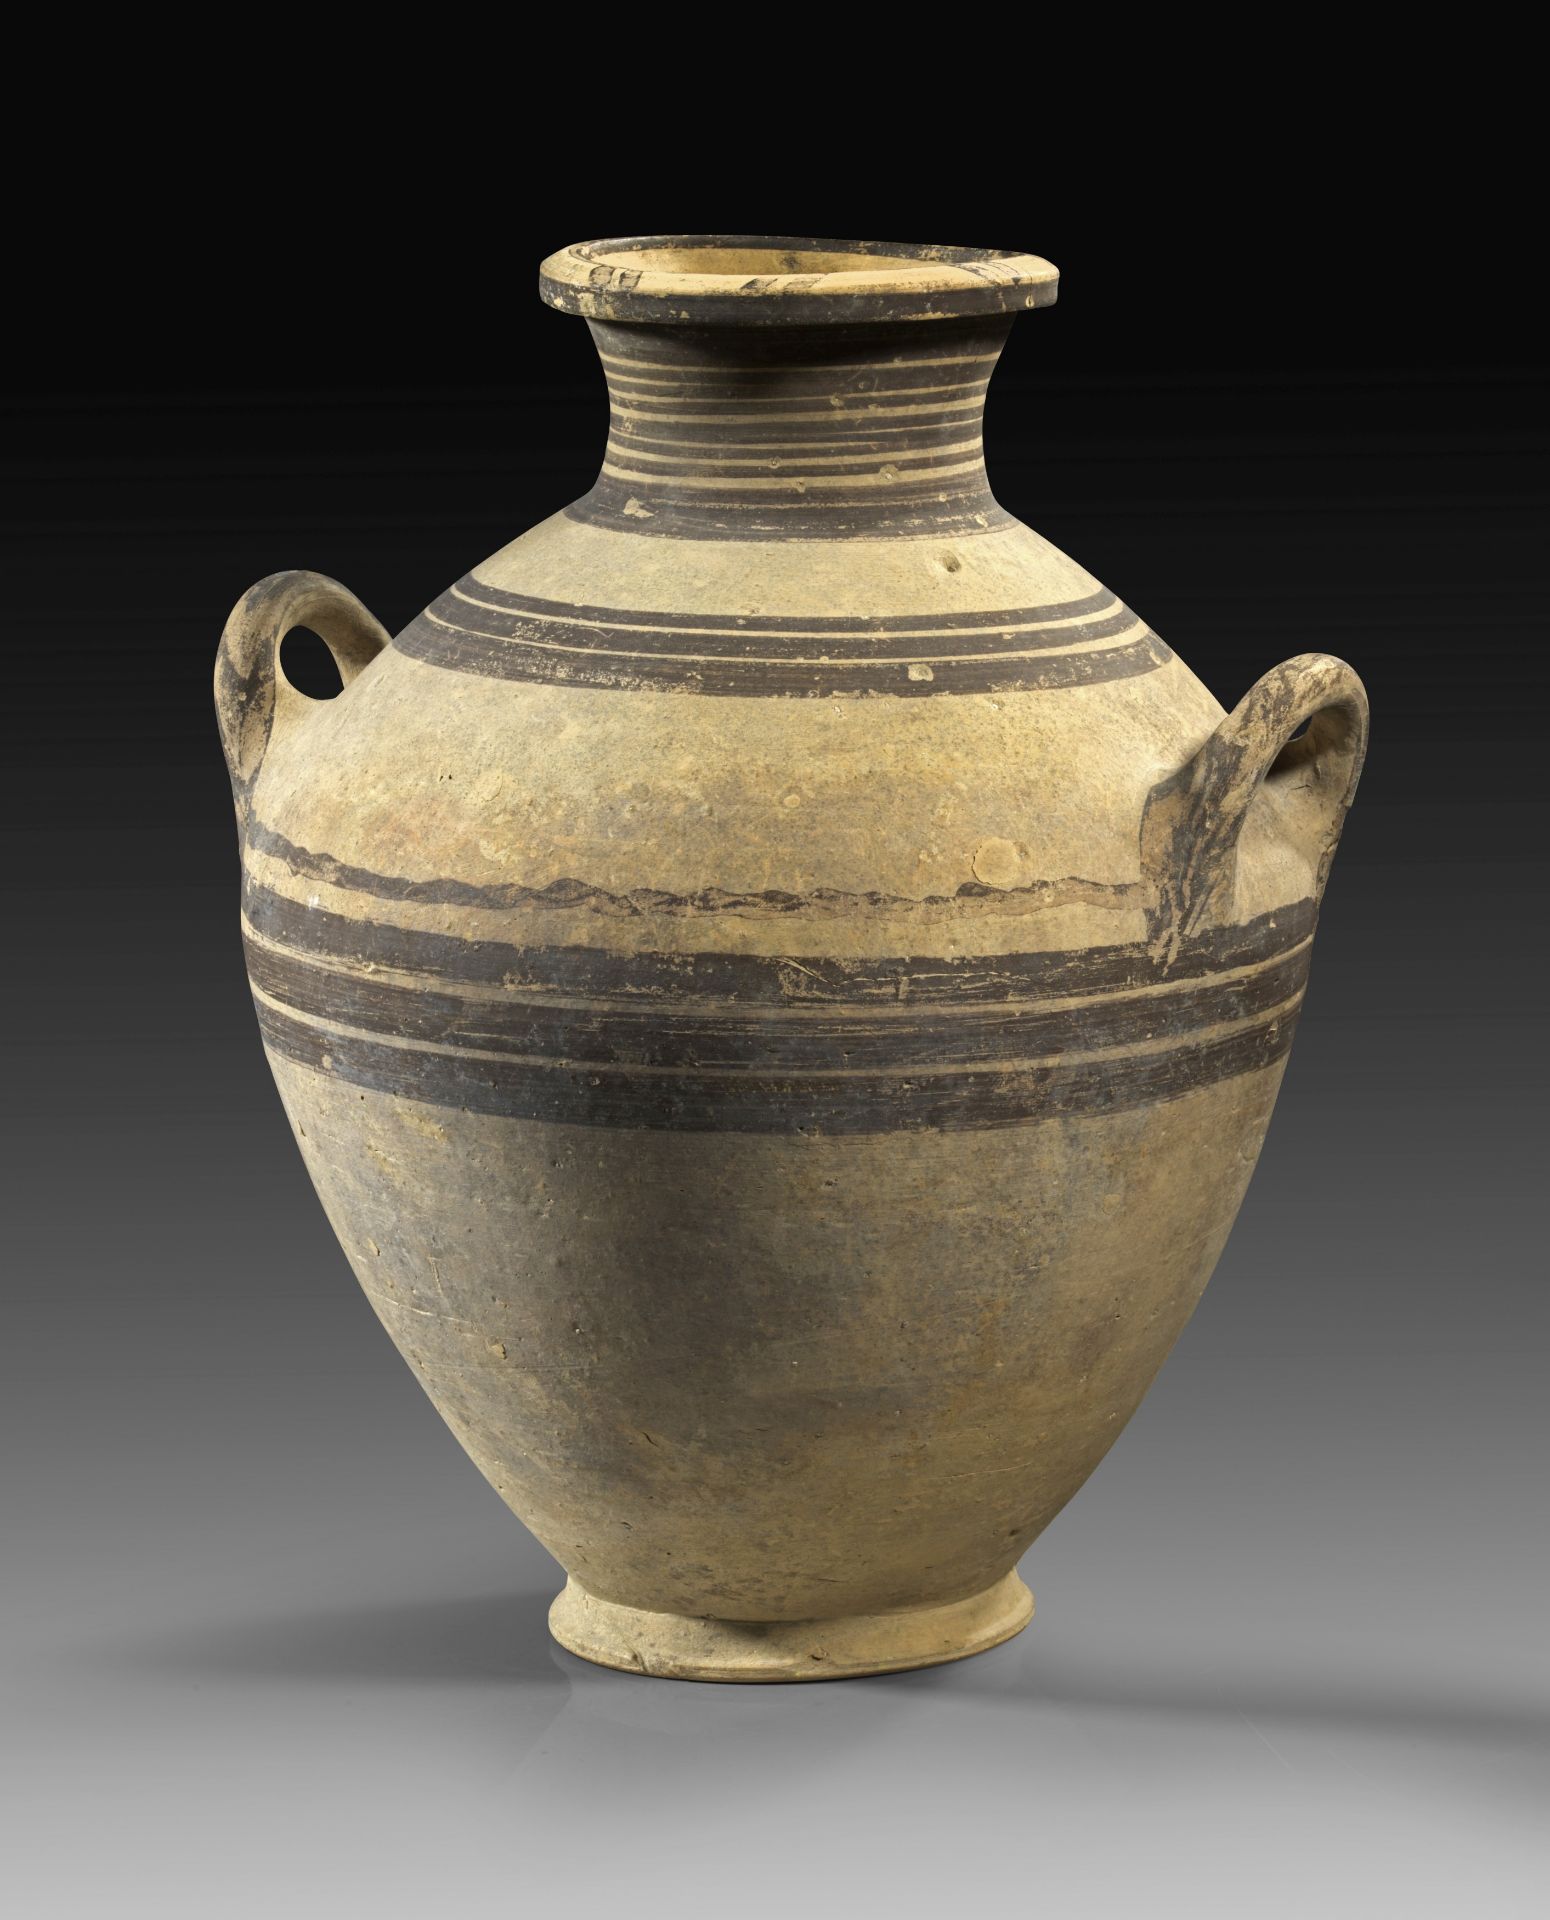 arge two-handled amphora of the White Painted III Ware.